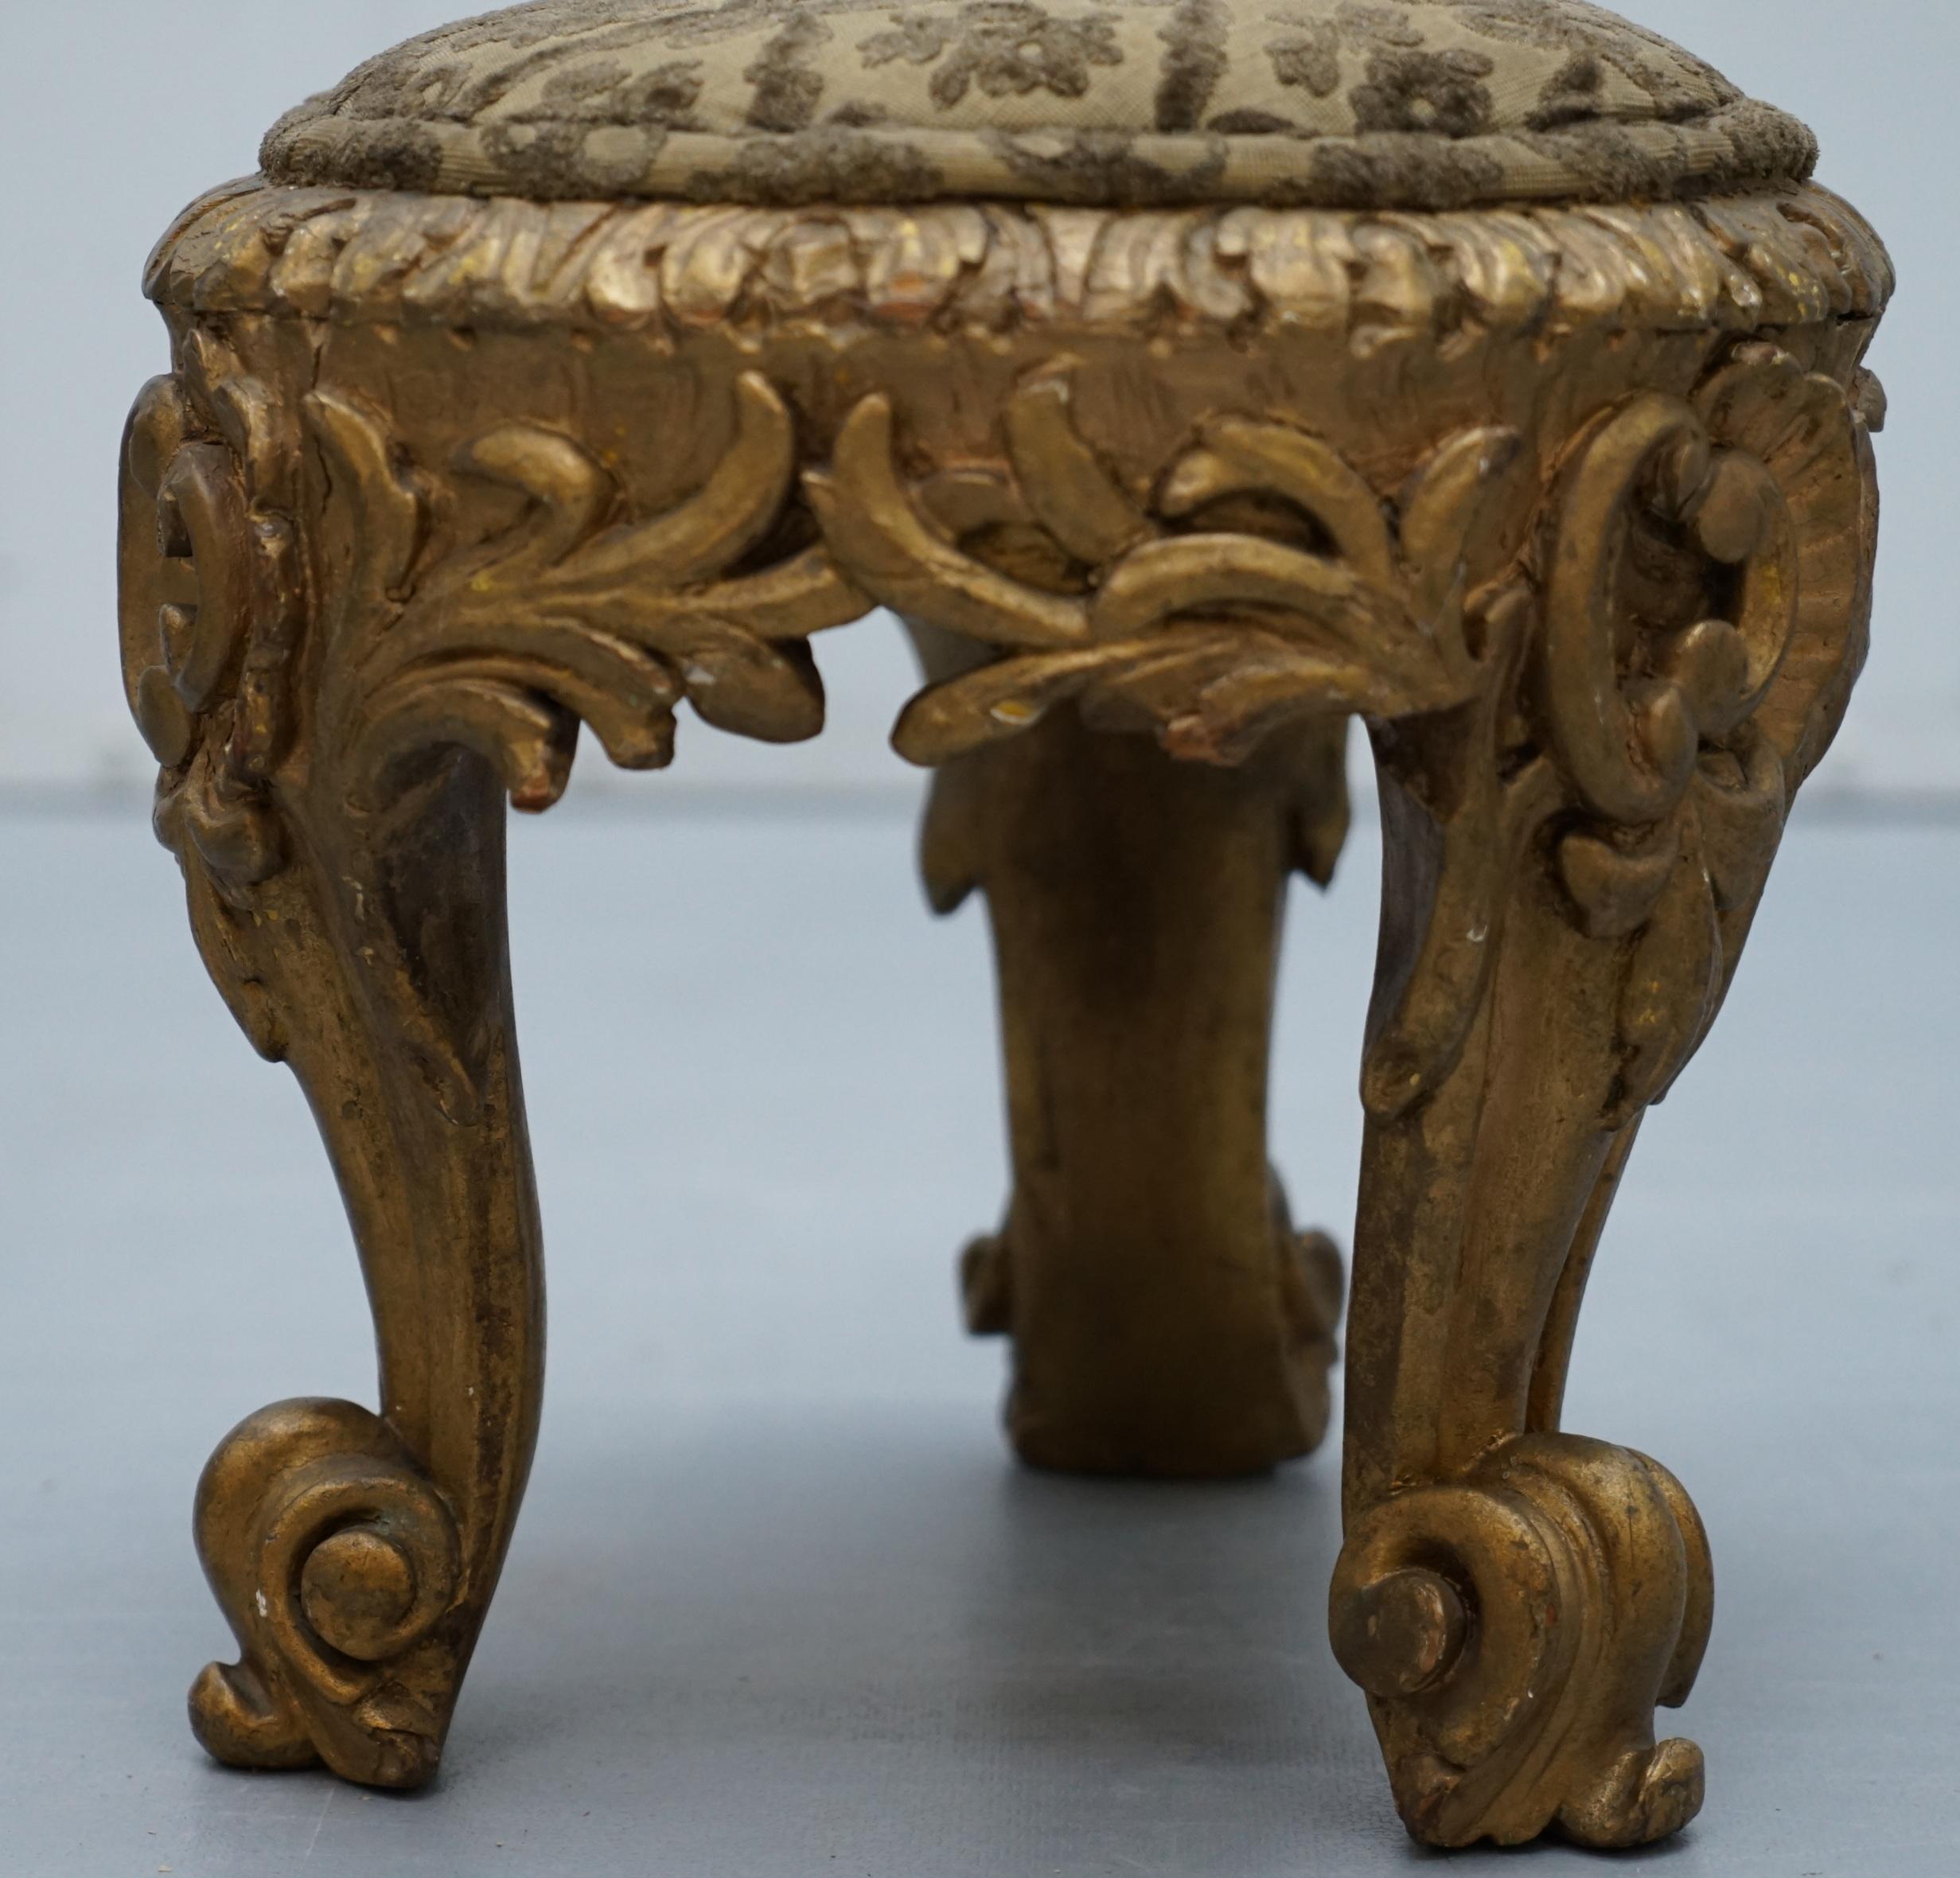 Rare Pair of Early 19th Century Italian Giltwood Stools Hand-Carved Solid Timber 2